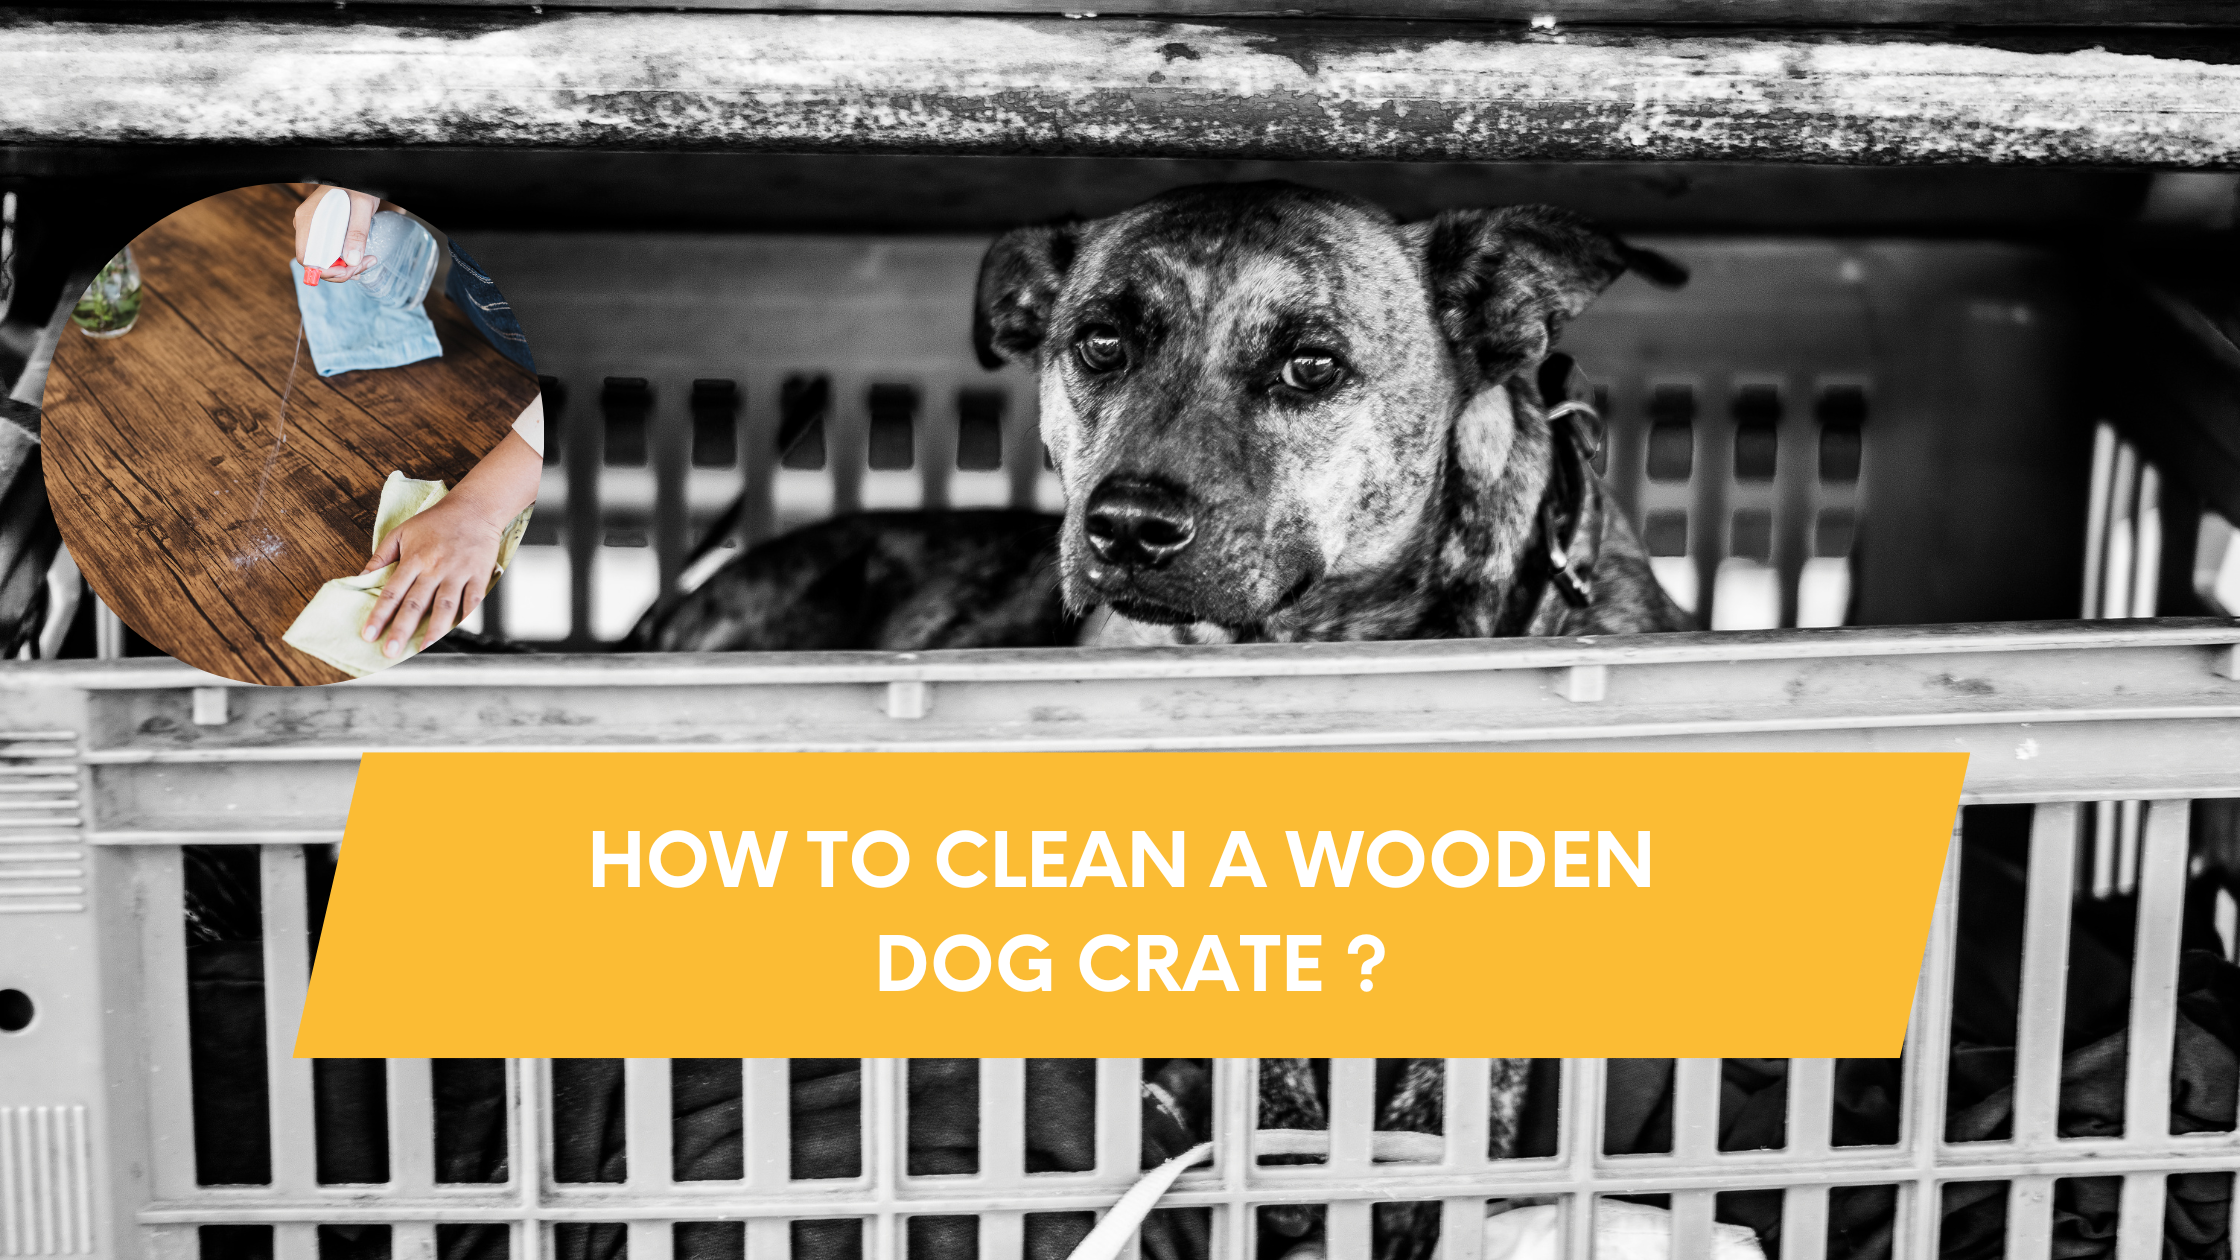 How to clean a wooden dog crate